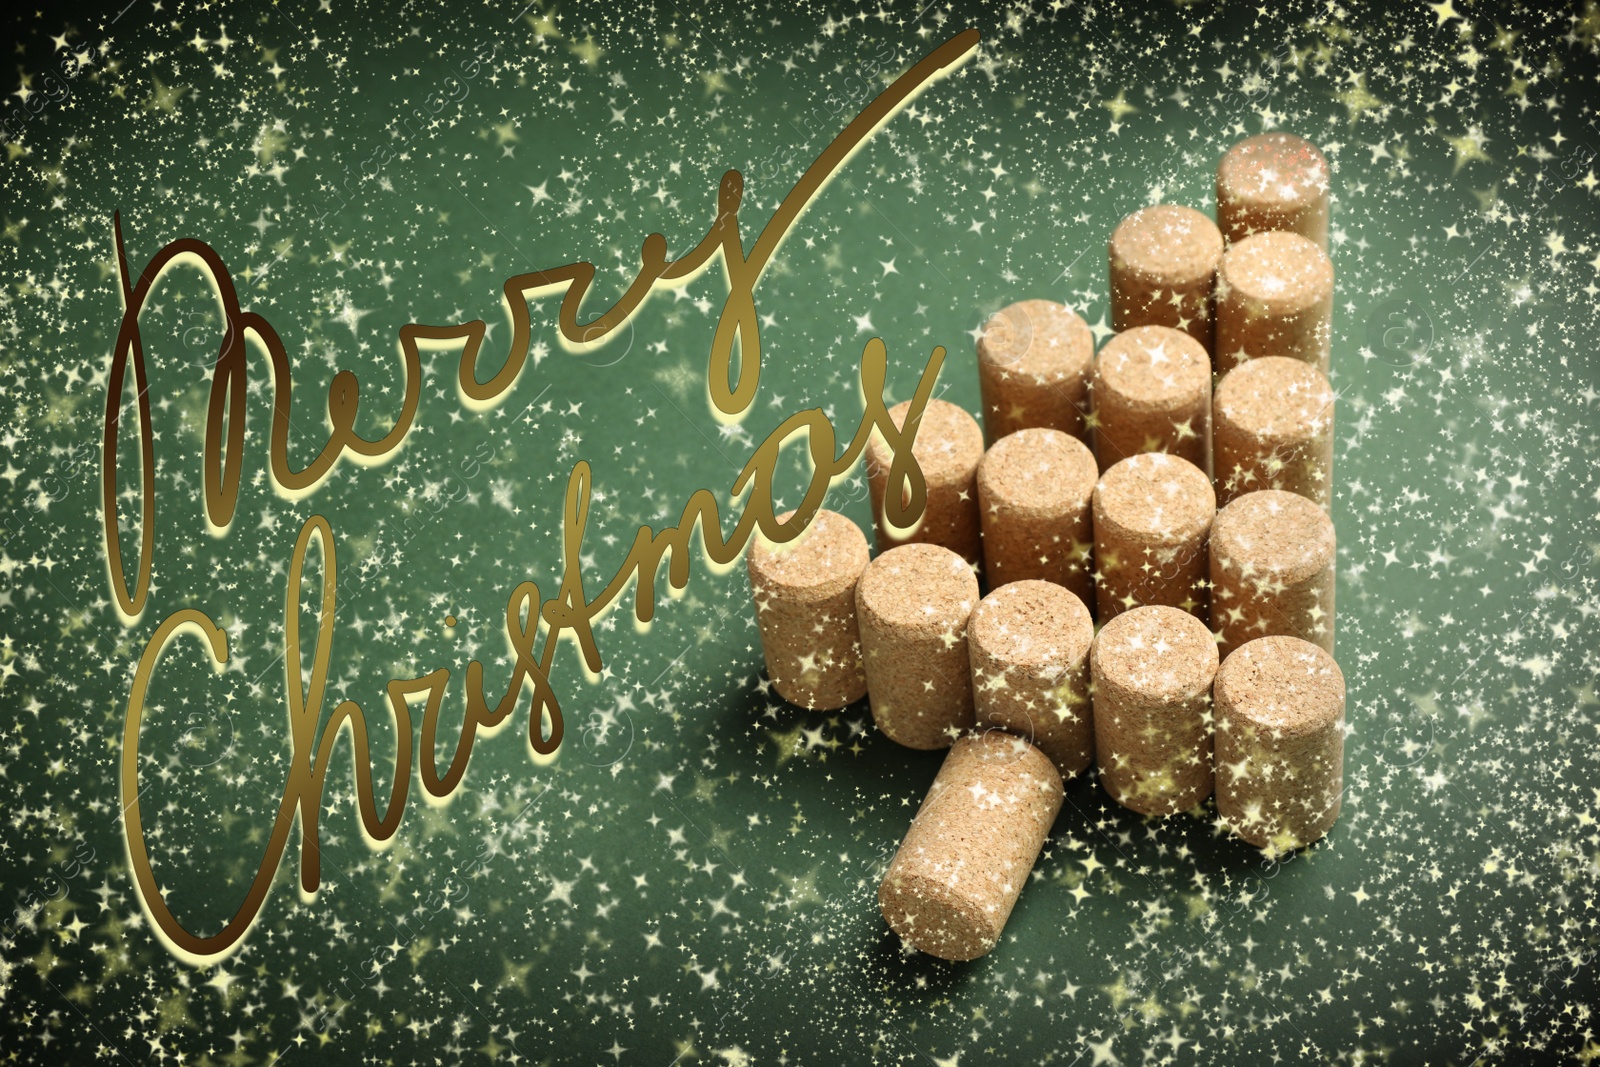 Image of Christmas tree made of wine corks on green background